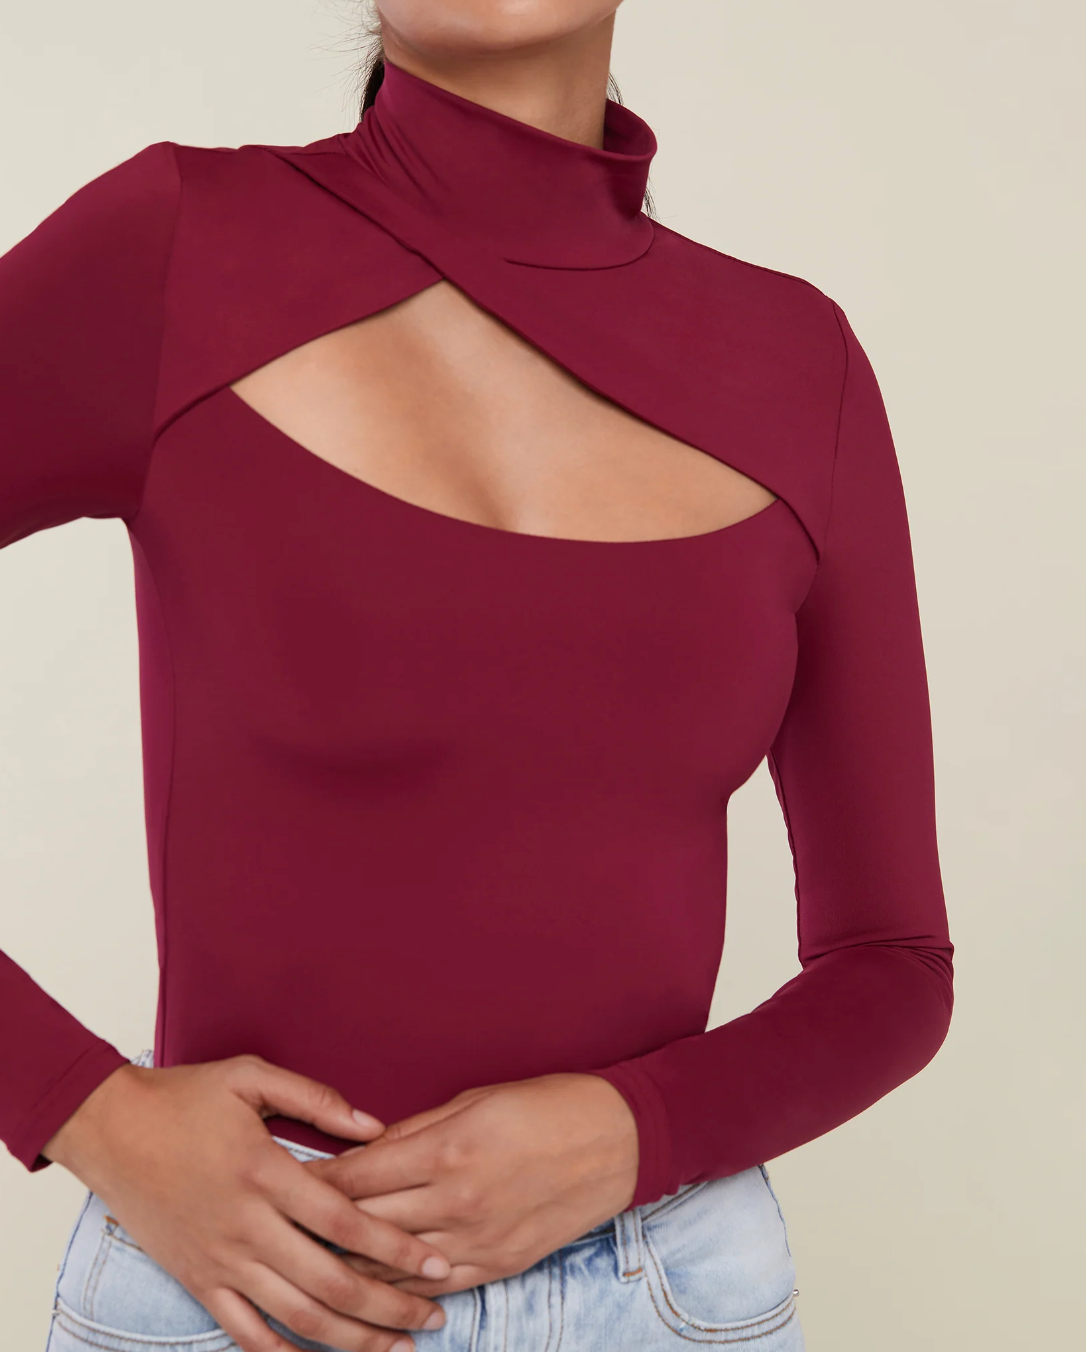 Photo of model wearing cut out bodysuit in red wine colour from Rachel Parcell available at UniKoncept in Waterloo